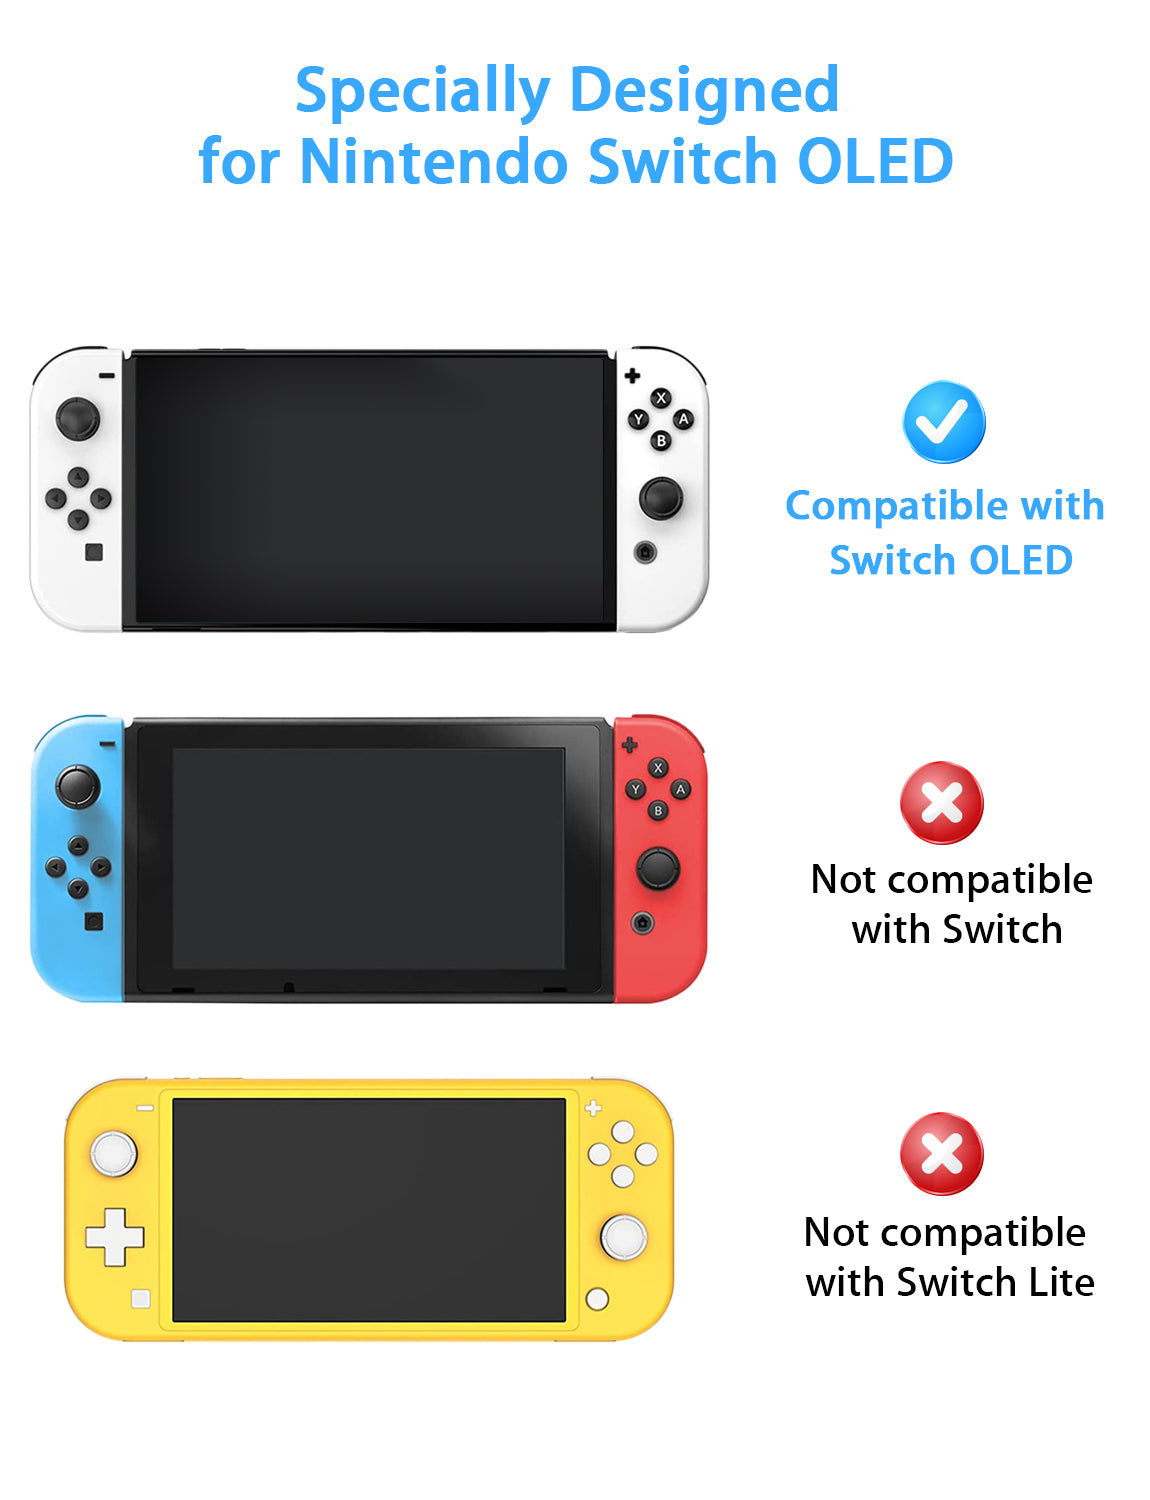 Specially designed for Nintendo Switch OLED.